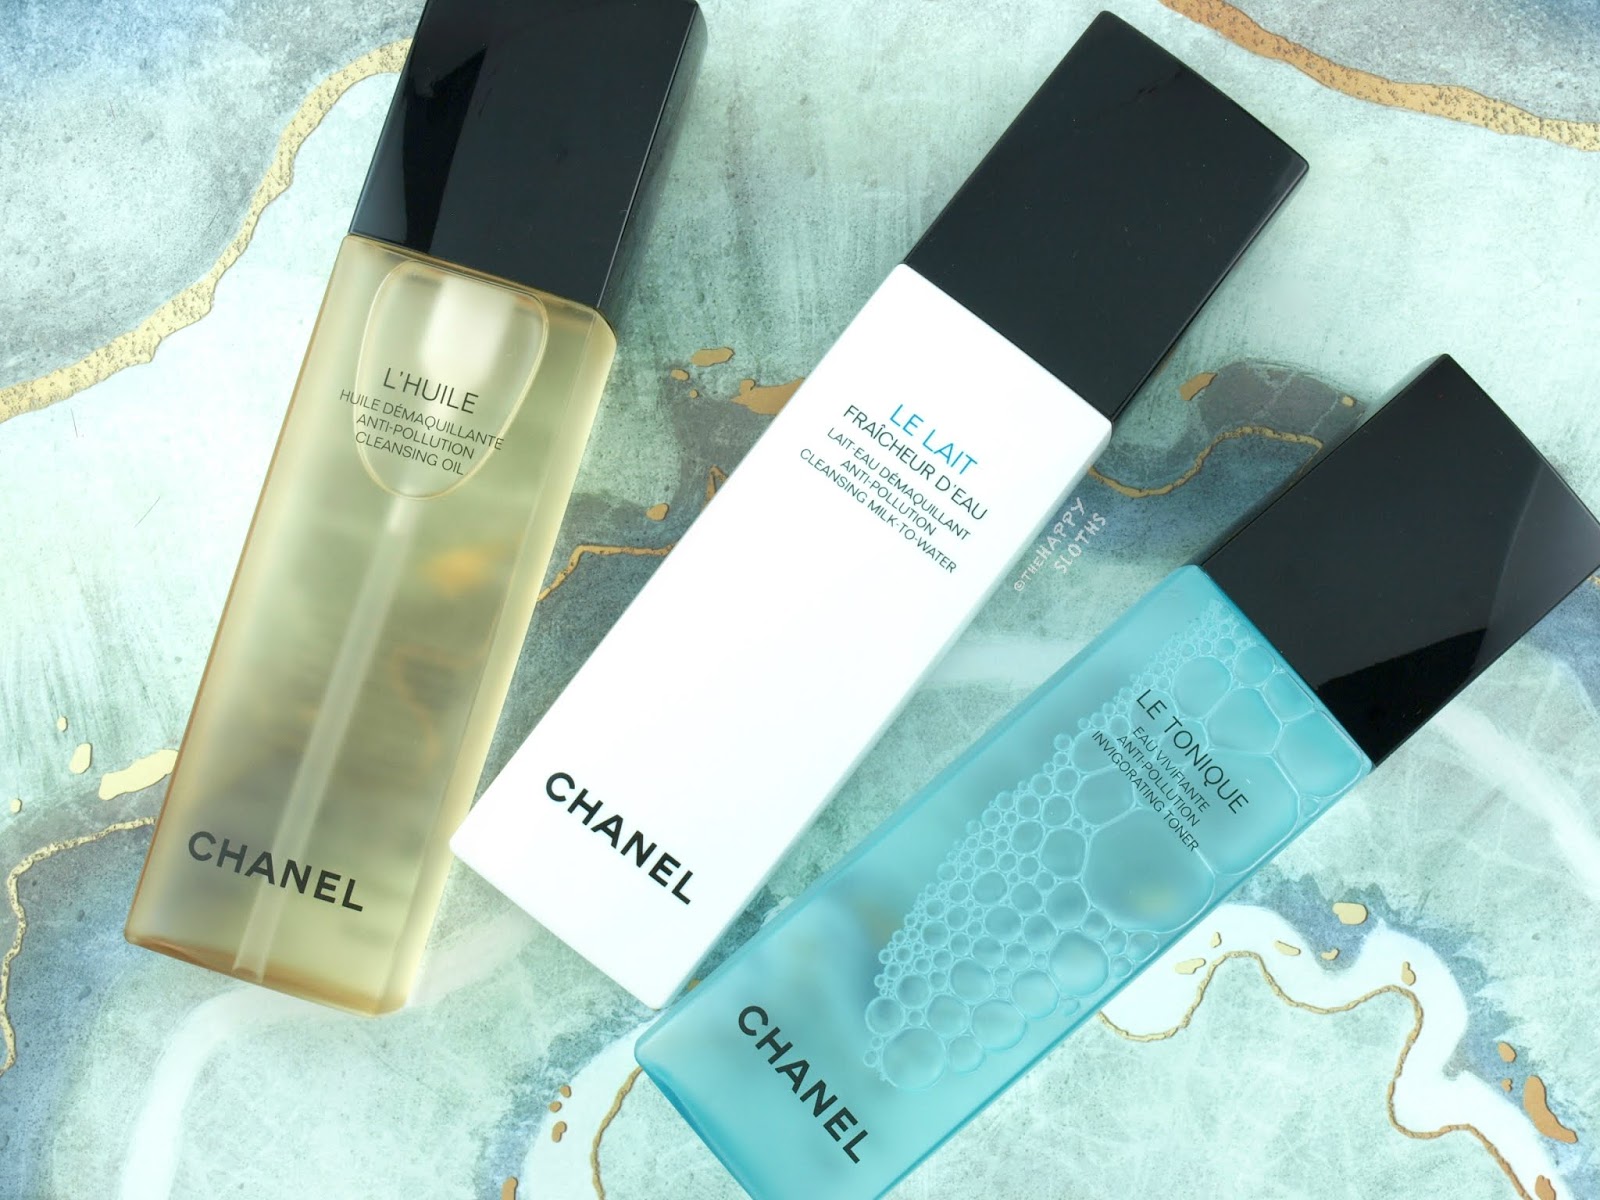 Chanel | L'Huile Cleansing Oil, Le Lait Cleansing Milk-To-Water & Le  Tonique Invigorating Toner: Review | The Happy Sloths: Beauty, Makeup, and  Skincare Blog with Reviews and Swatches